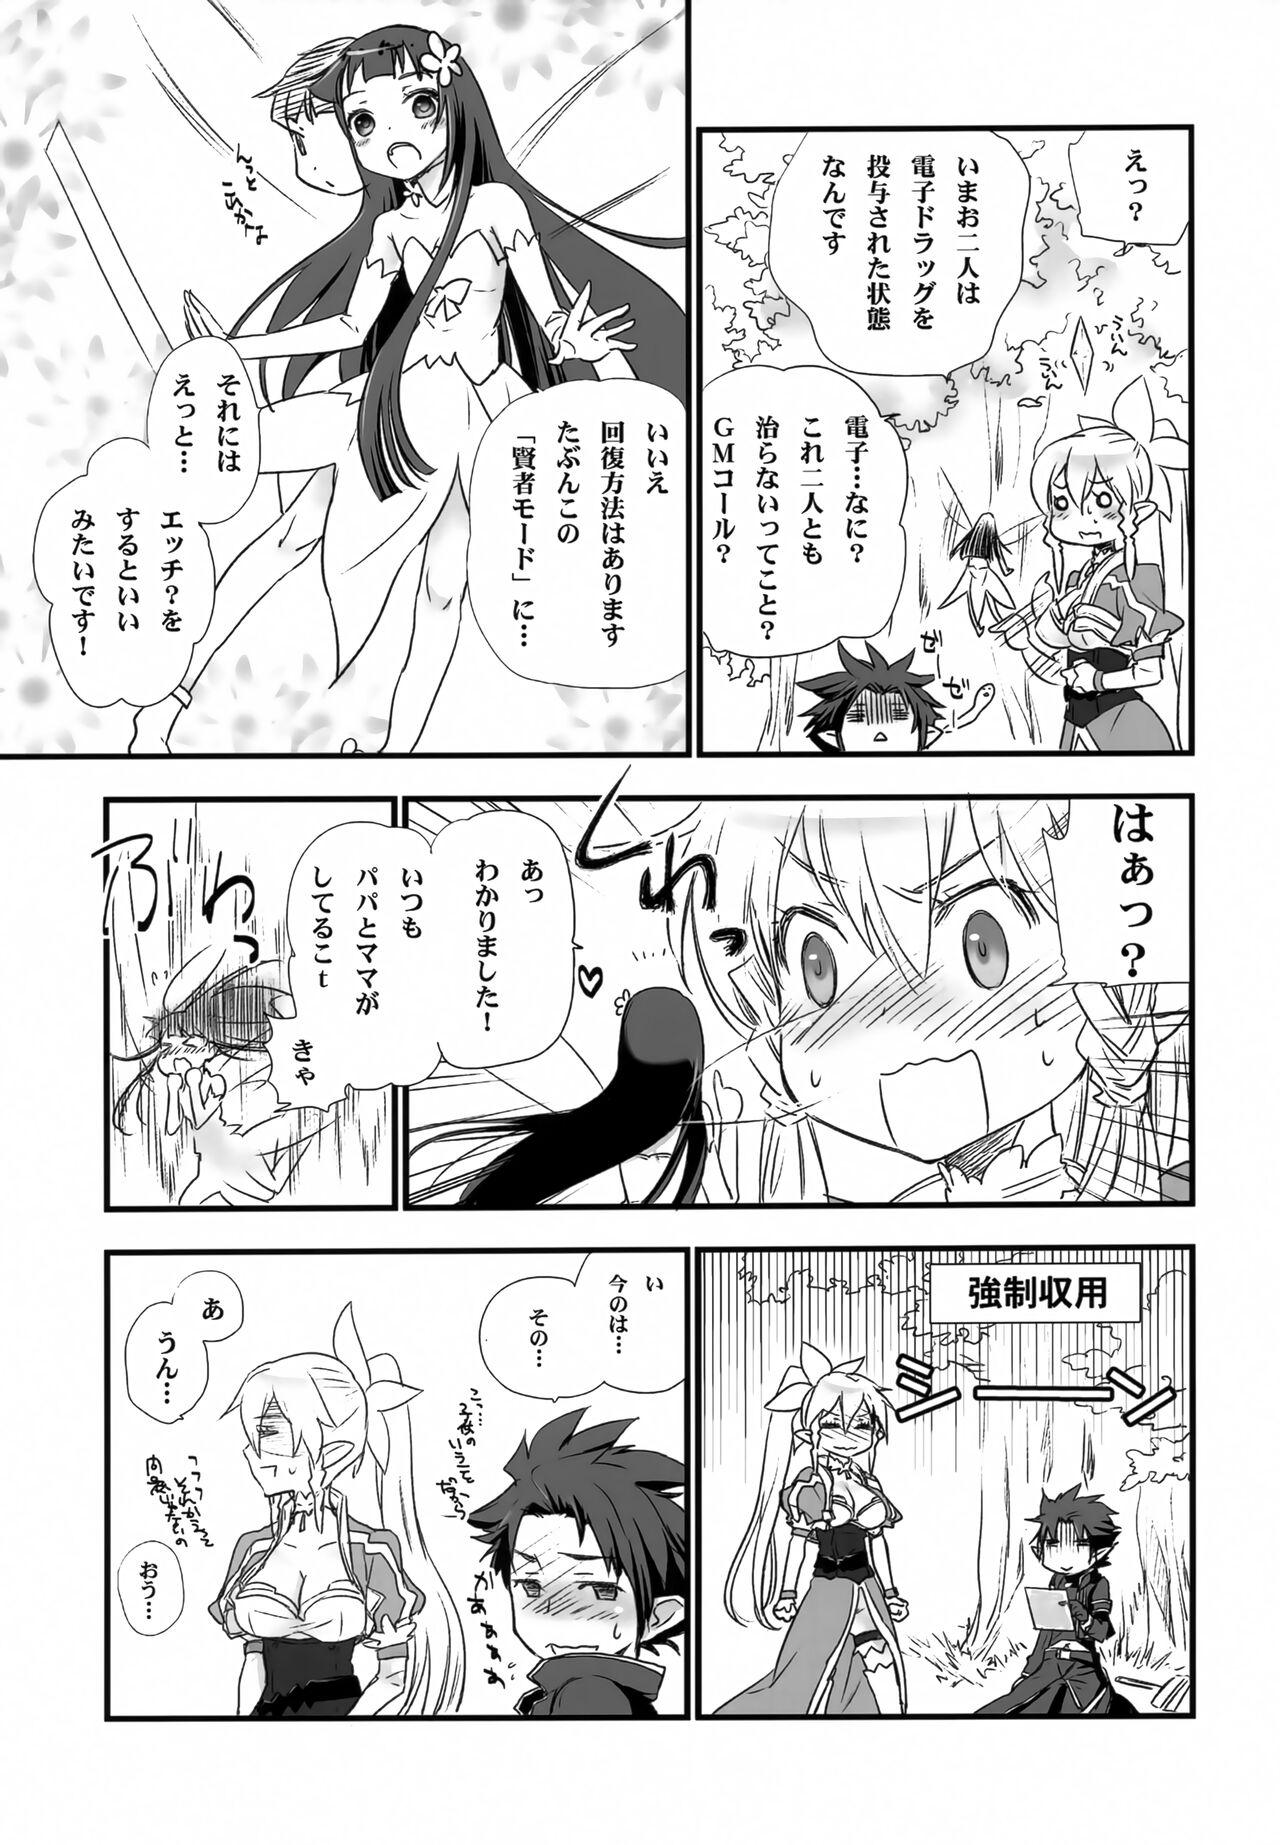 Outdoor Sex Fairy Tail - Sword art online Banho - Page 10